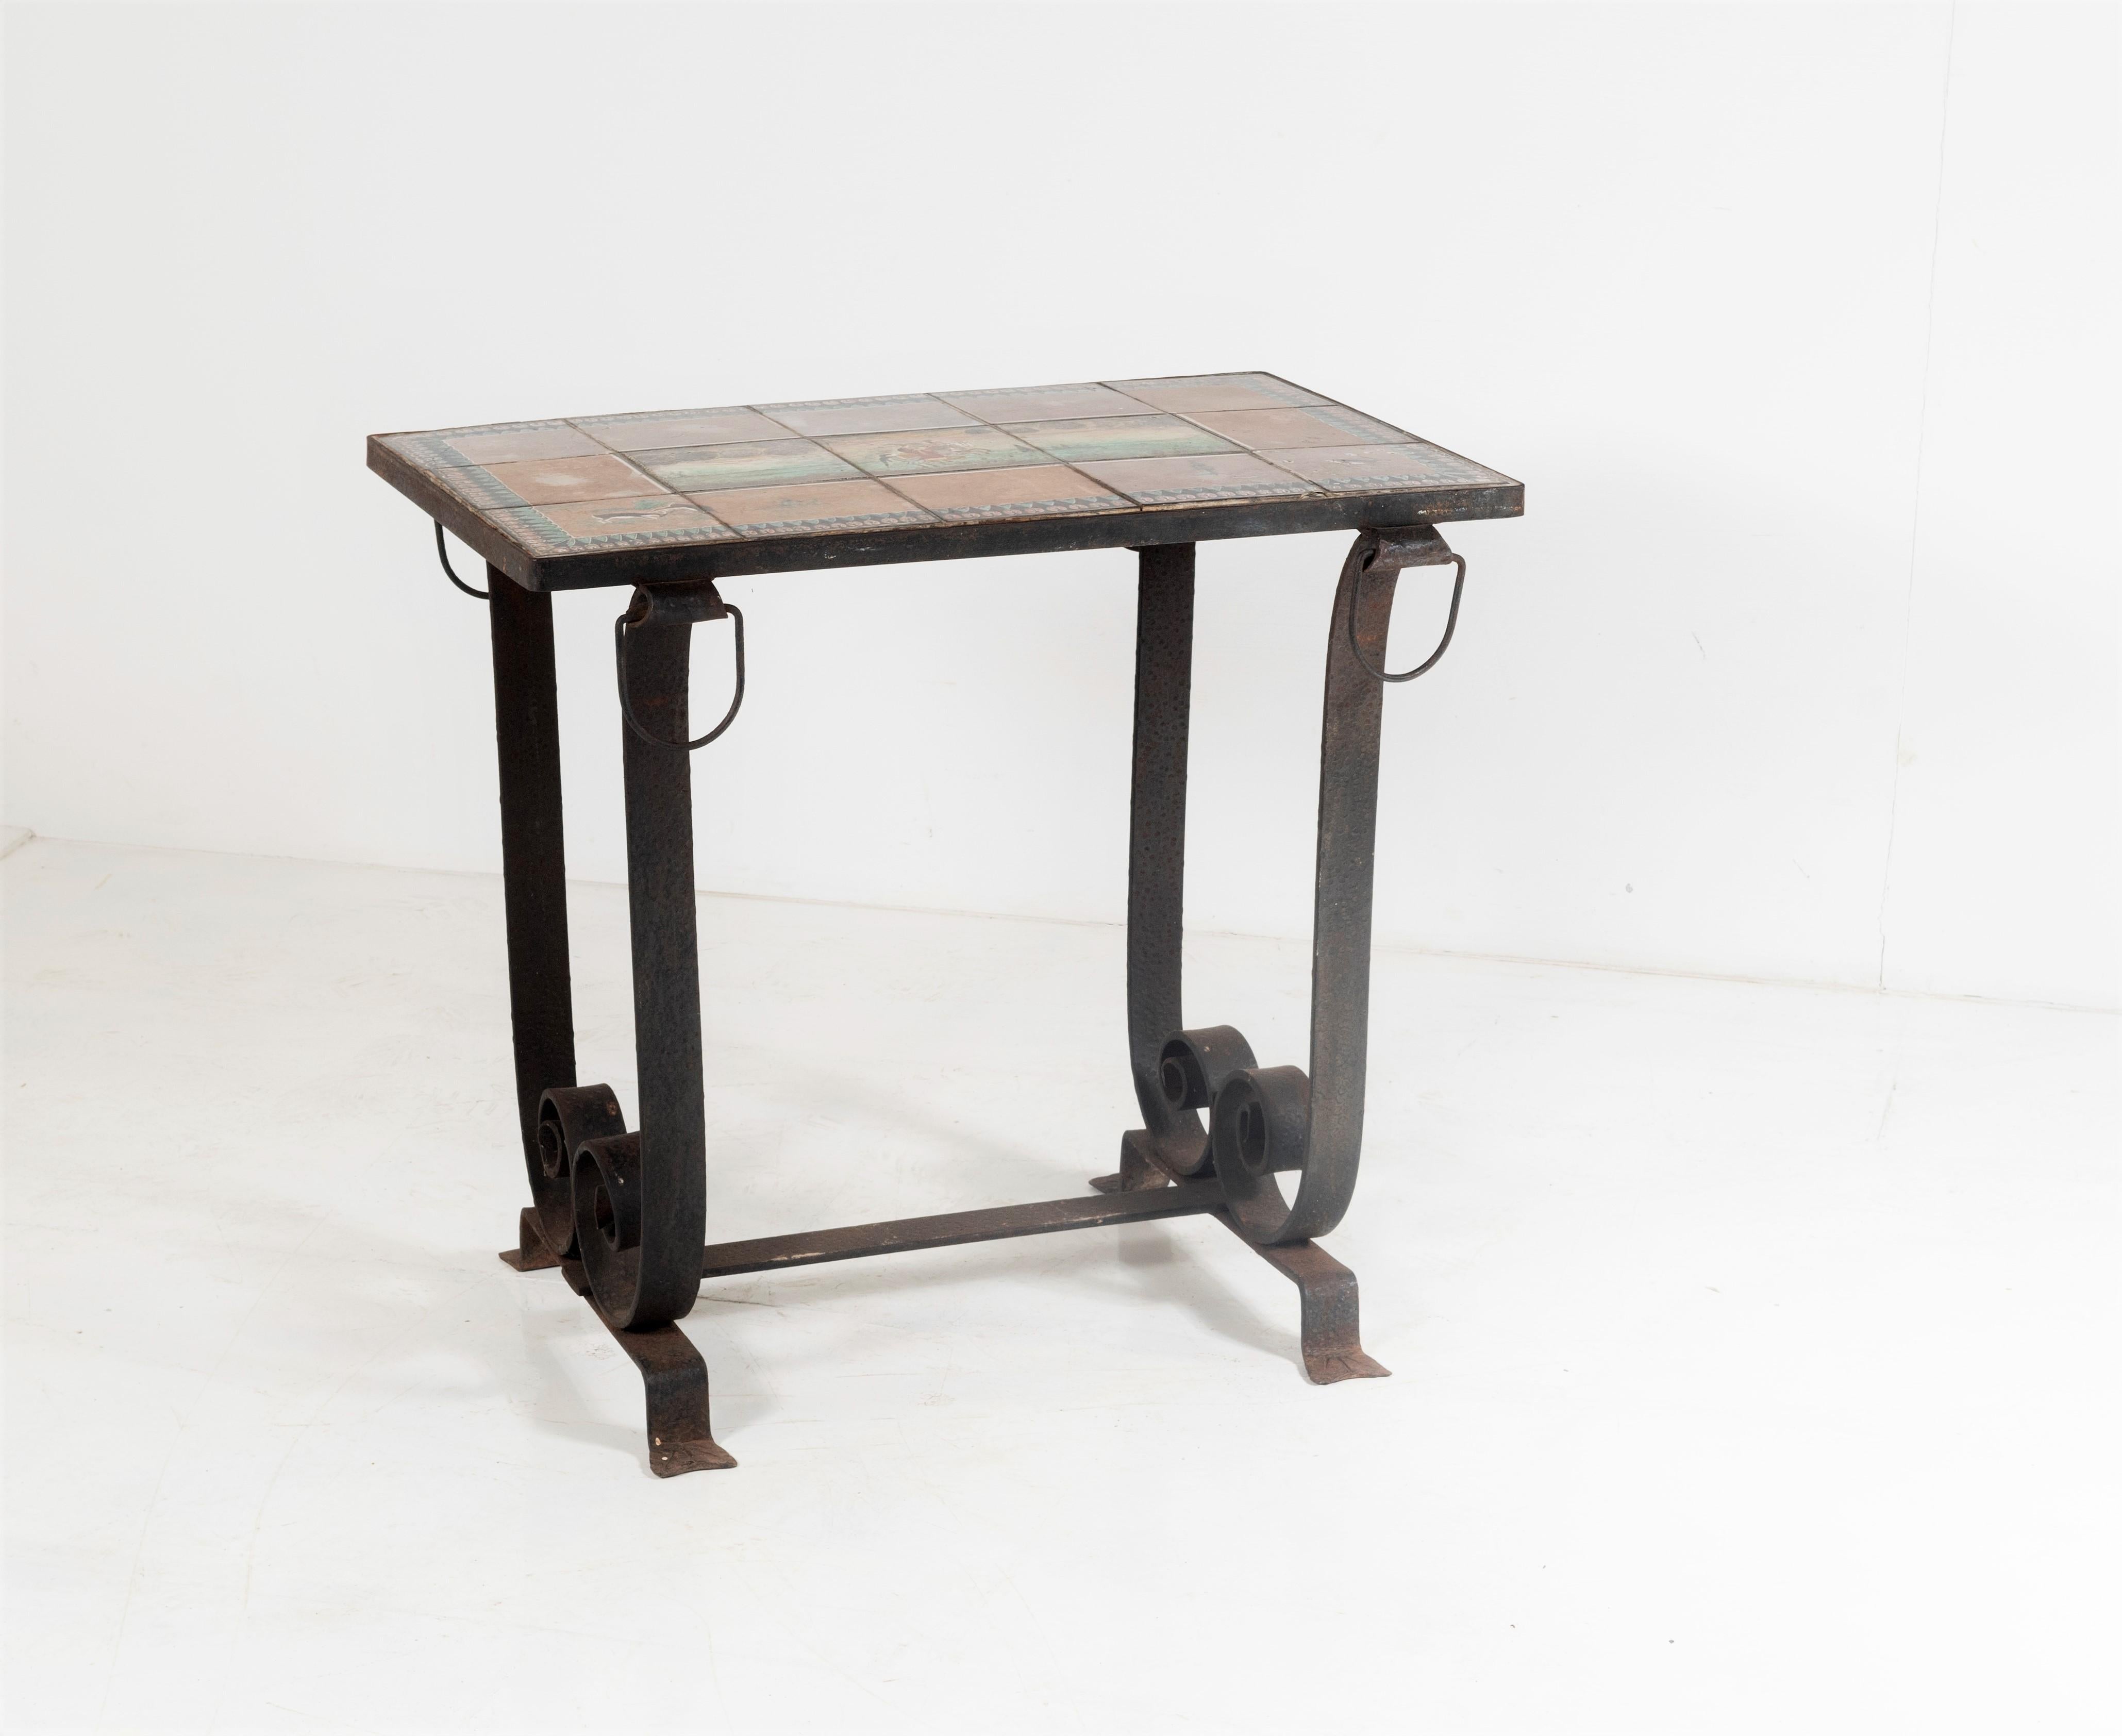 Arts and Crafts Spanish Revival Wrought Iron Tile Top Patio Catalina Side Table  Addison Mizner